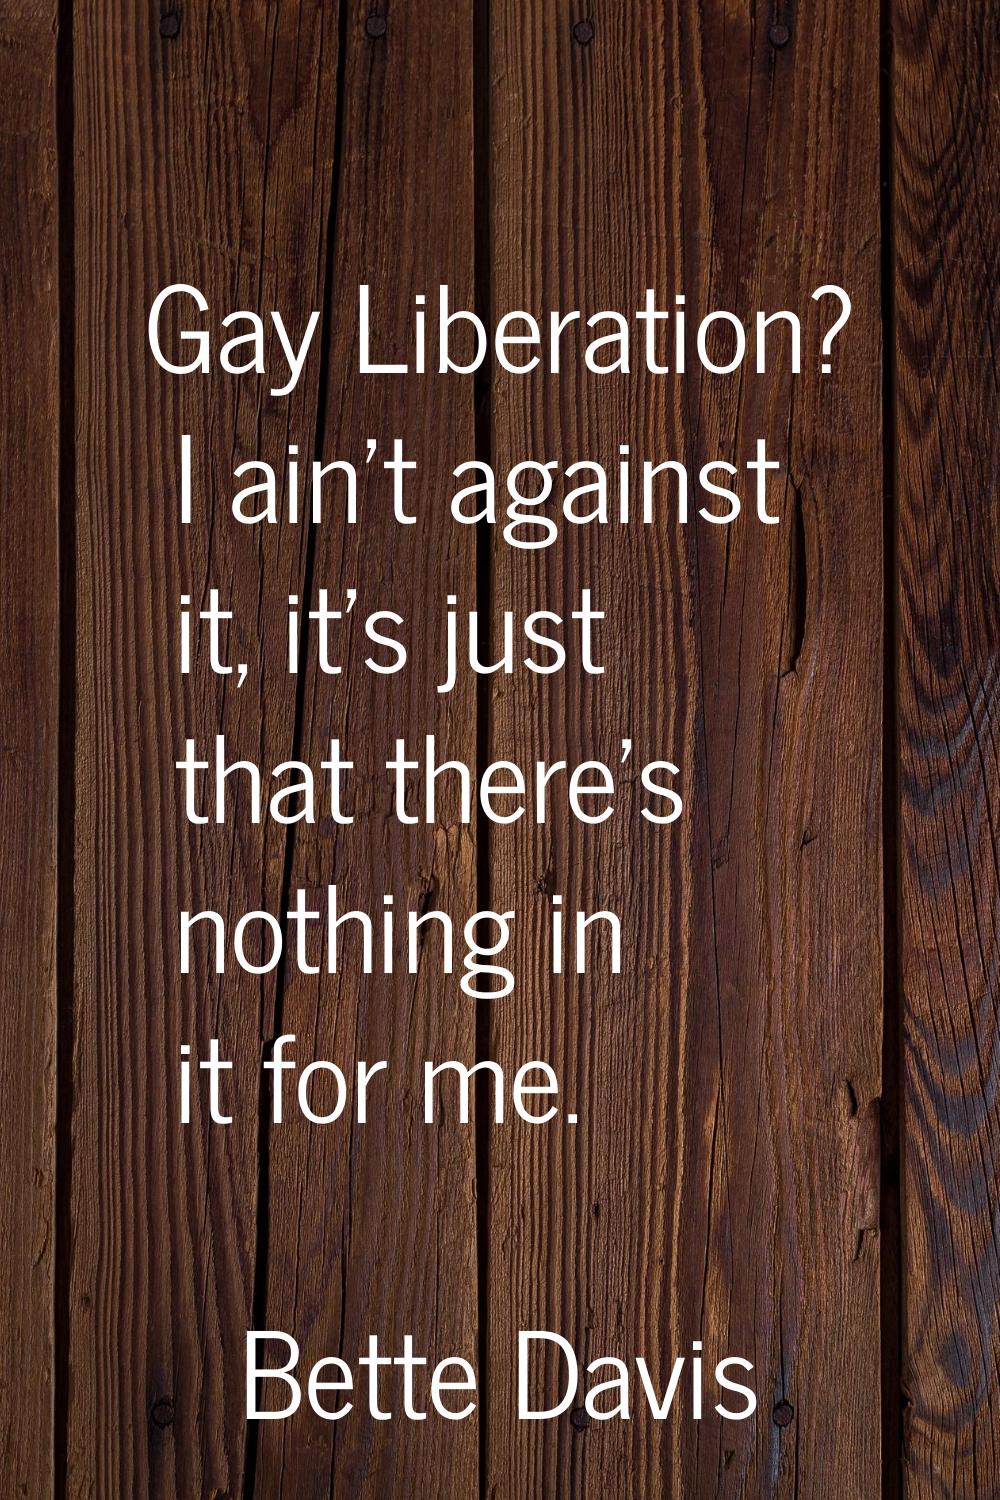 Gay Liberation? I ain't against it, it's just that there's nothing in it for me.